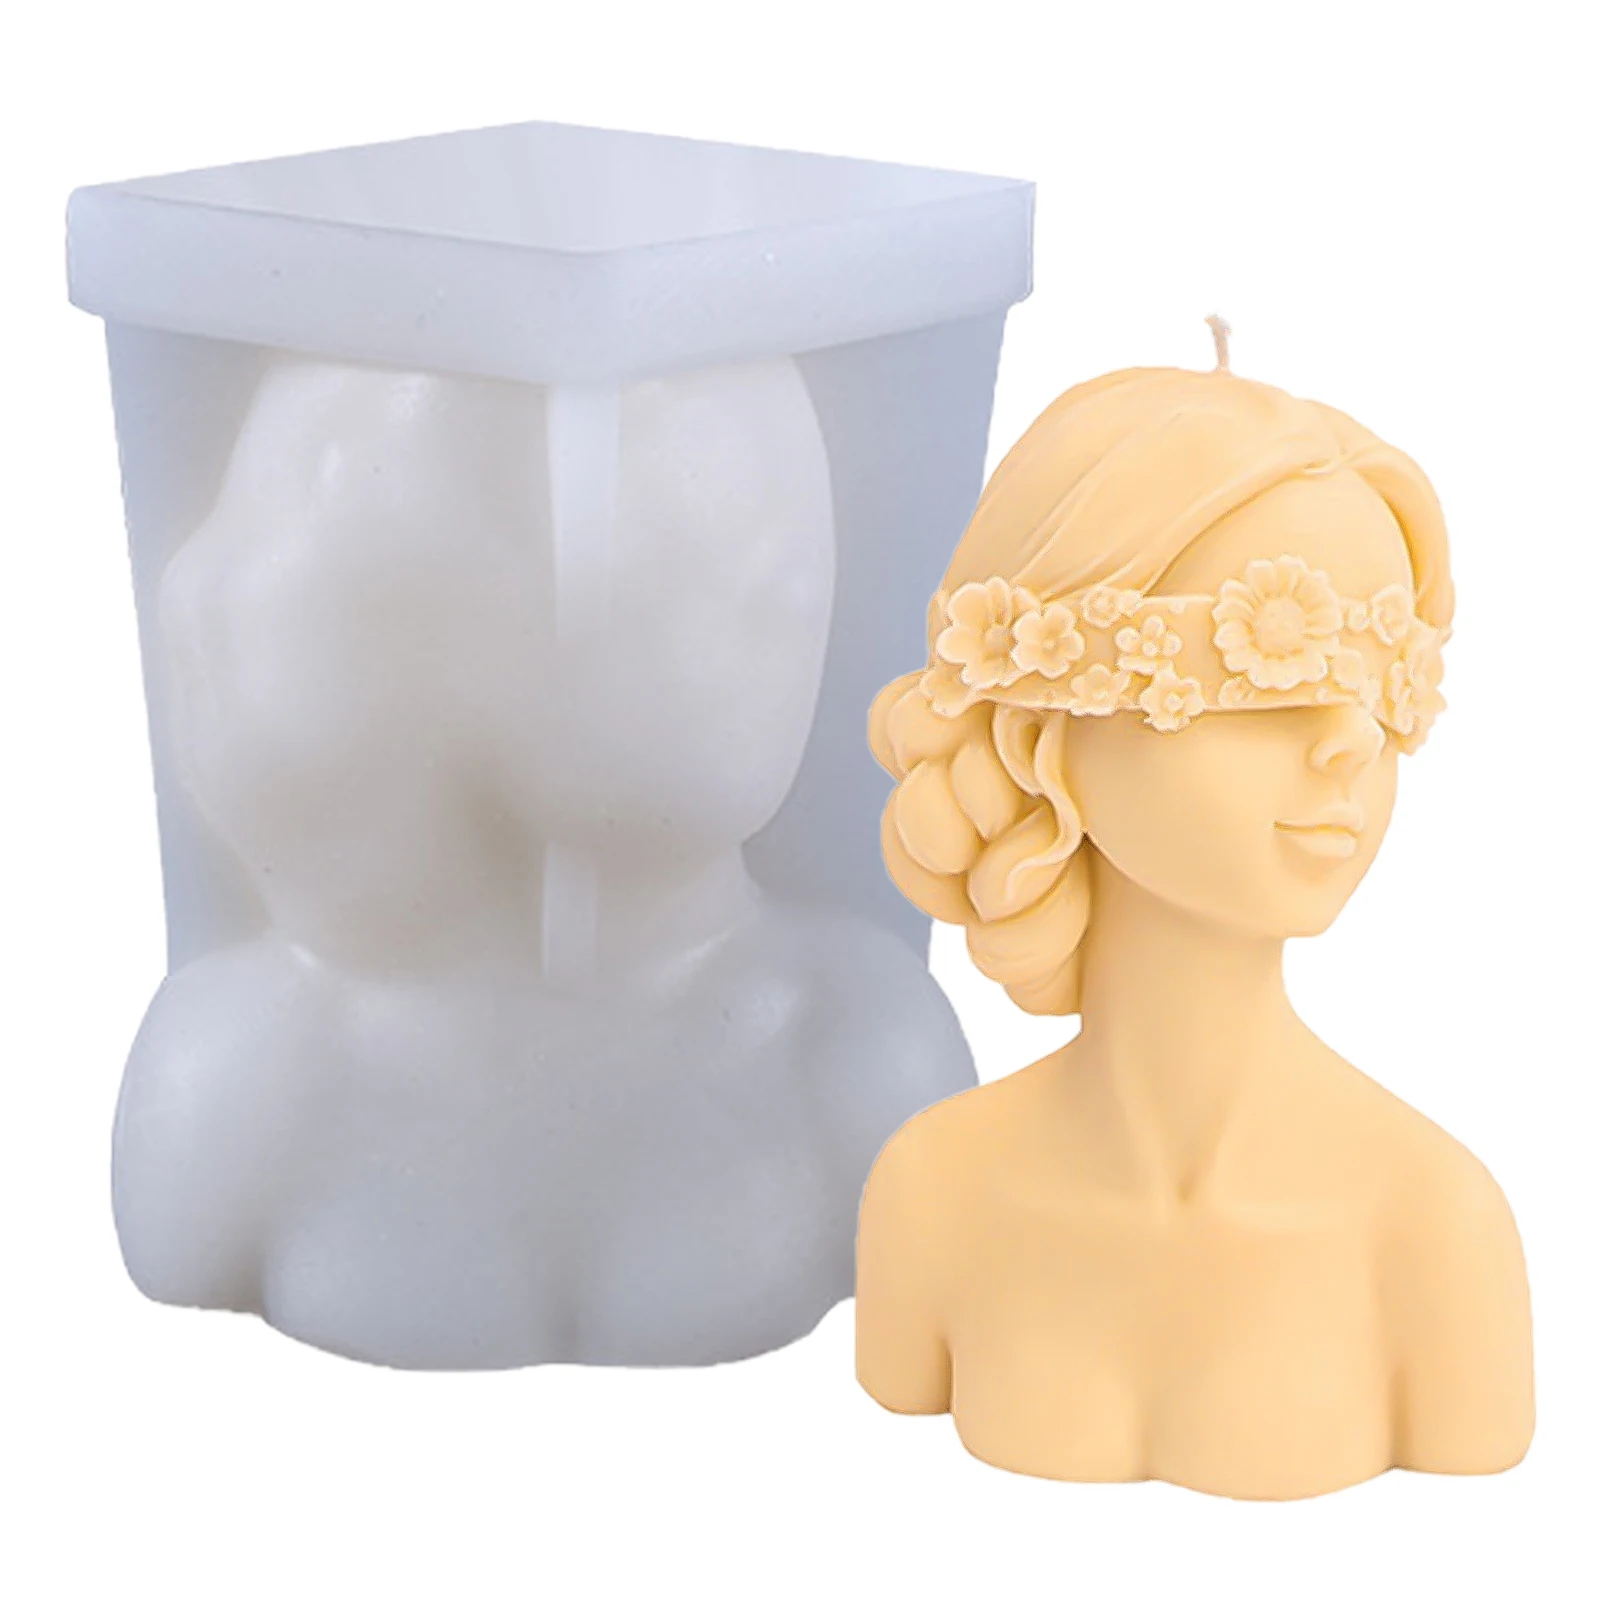 

New Closed-Eye Girl Aromatherapy Candle Mould Blindfolded Debate Beauty Plaster Resin Mold Silicone Mold Candle Making Molds